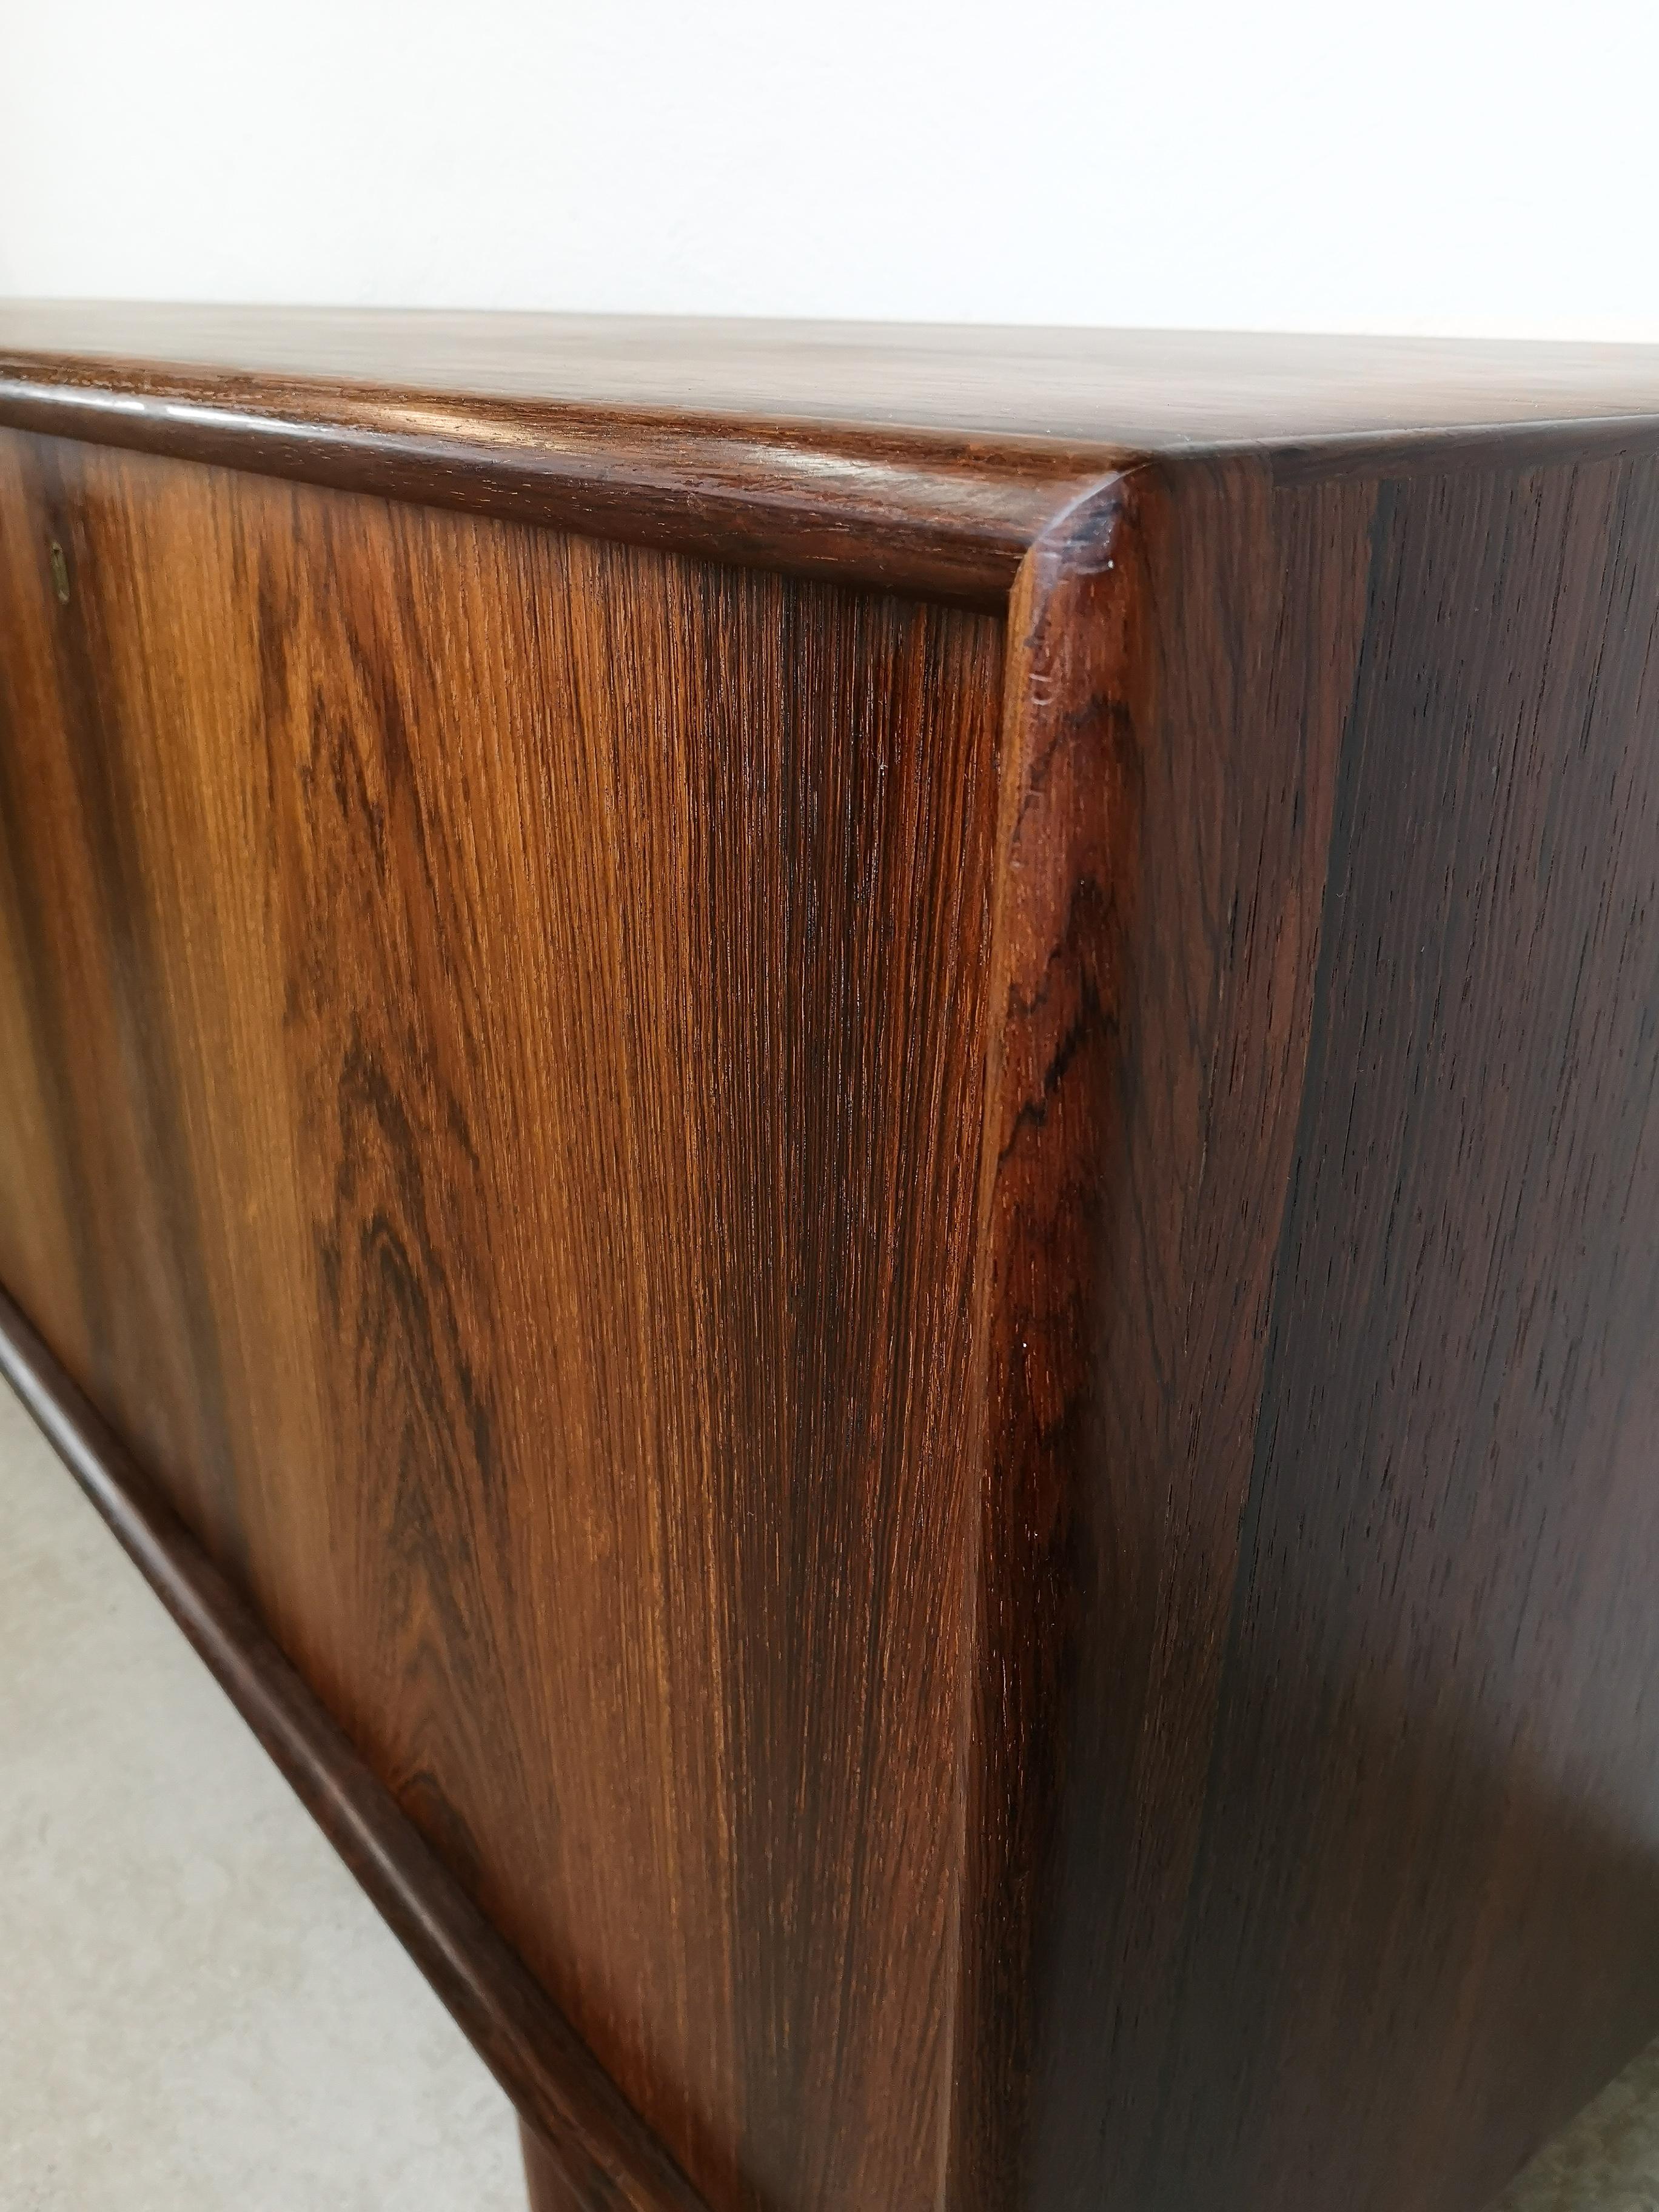 Sideboard in rosewood by Norwegian designer Torbjørn Afdal by Nejestranda Møbelfabrik for Bruksbo.
This sideboard is a very high-quality piece with lovely crafts details with curved short ends on the doors and brass key holes.
It’s not often to be